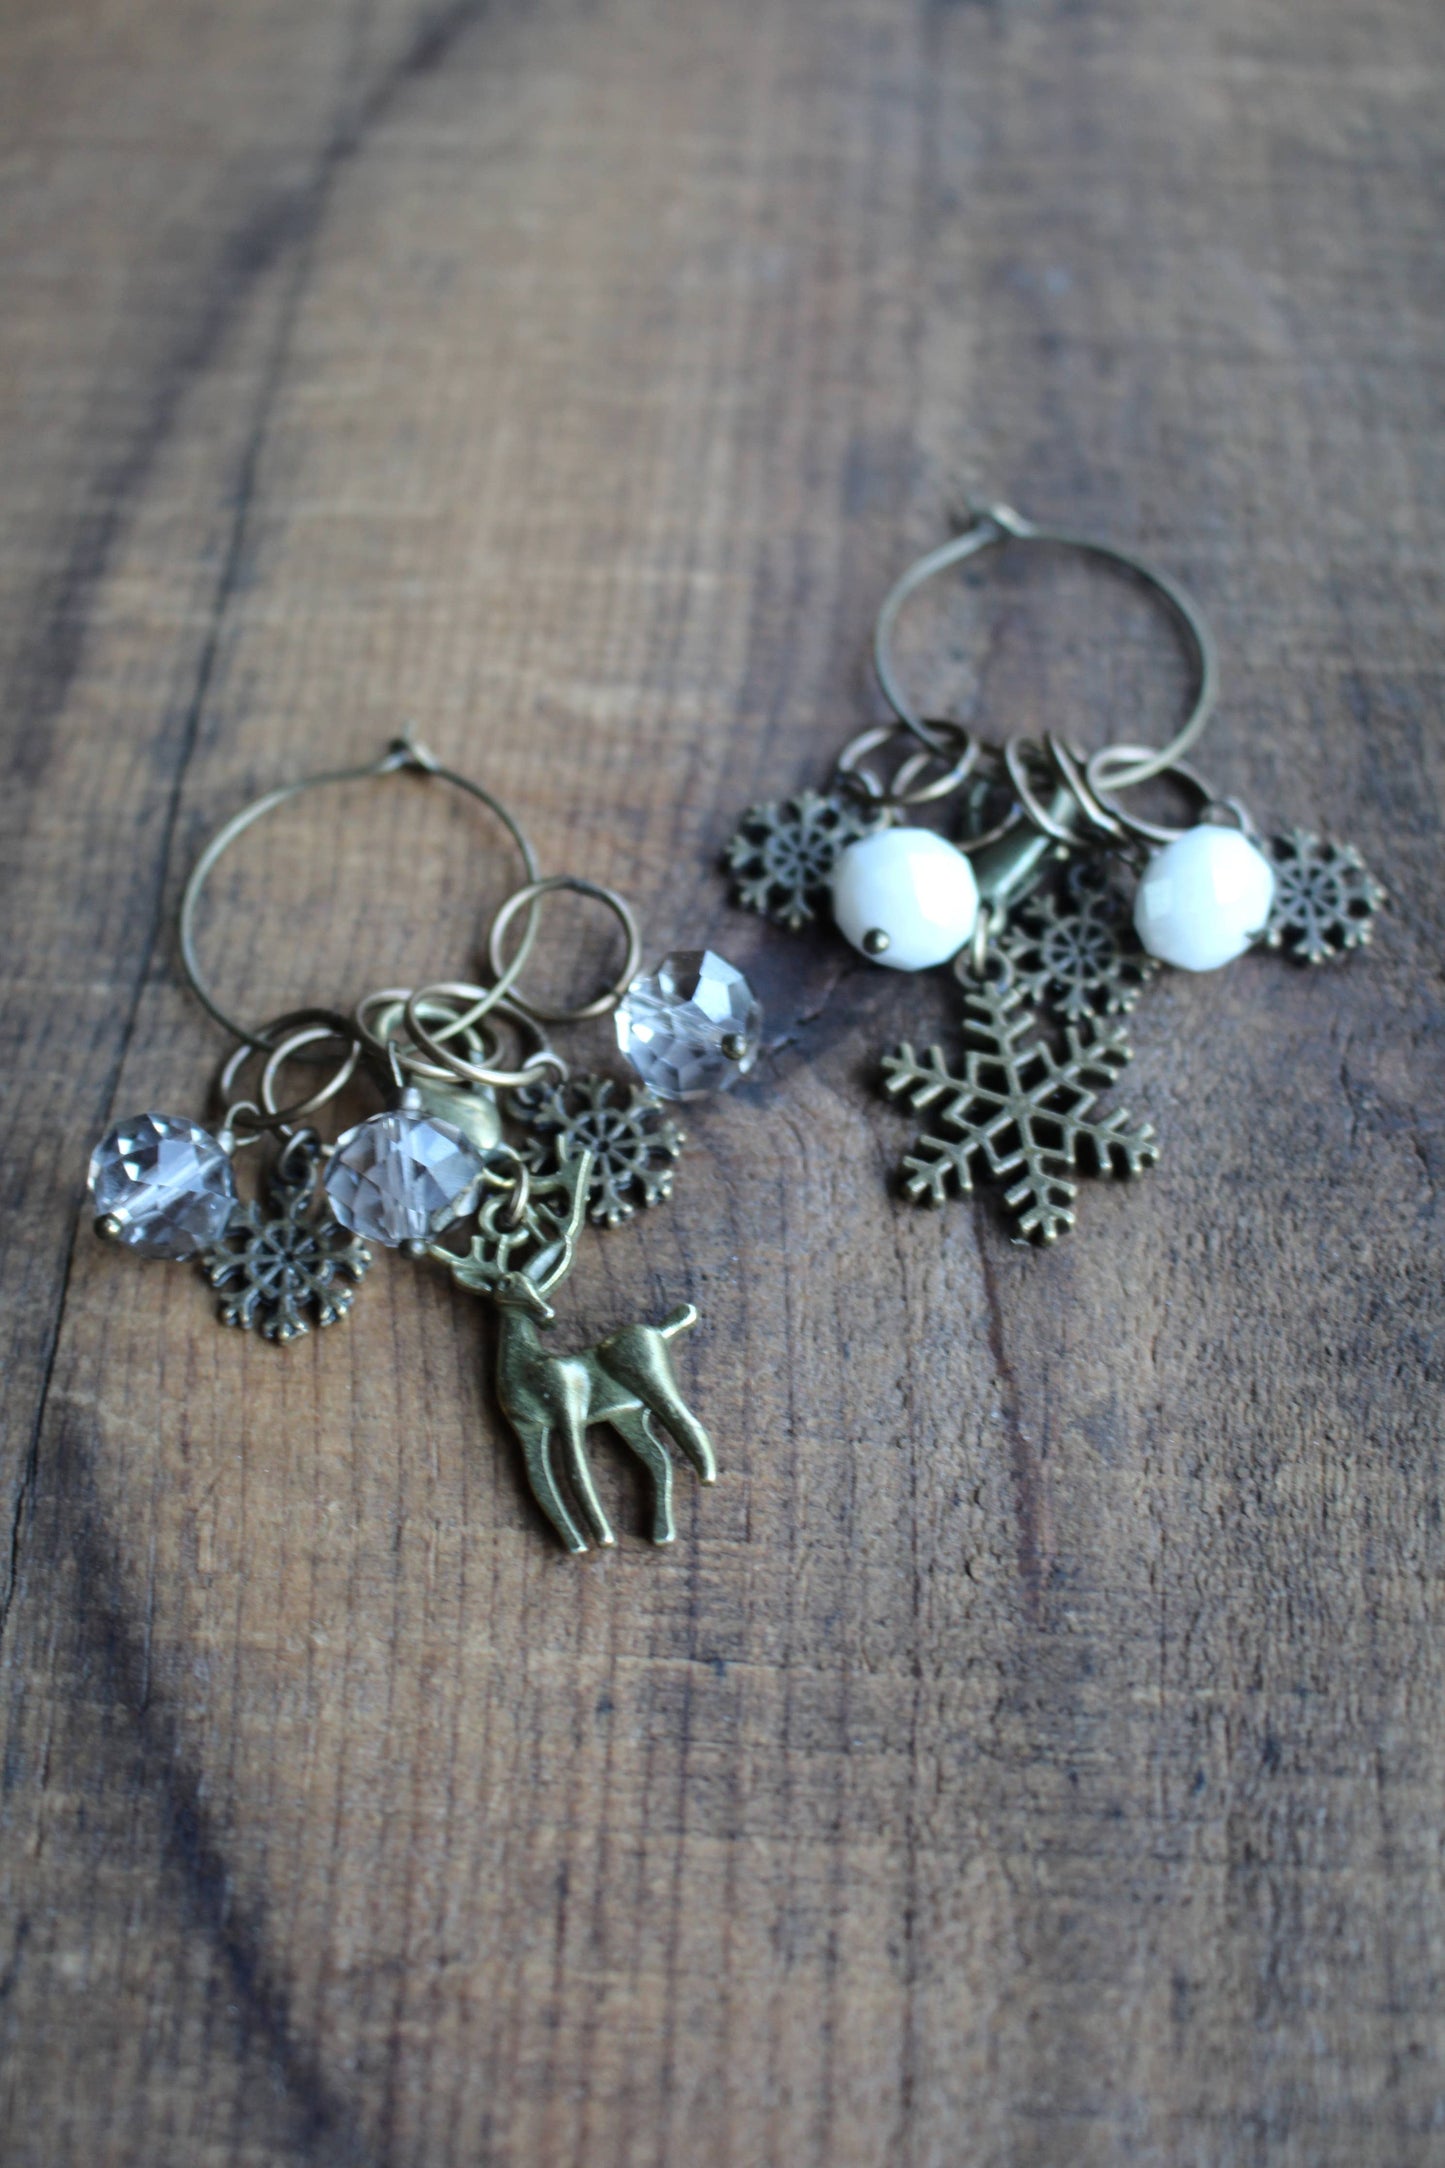 Winter Forest Stitch Markers